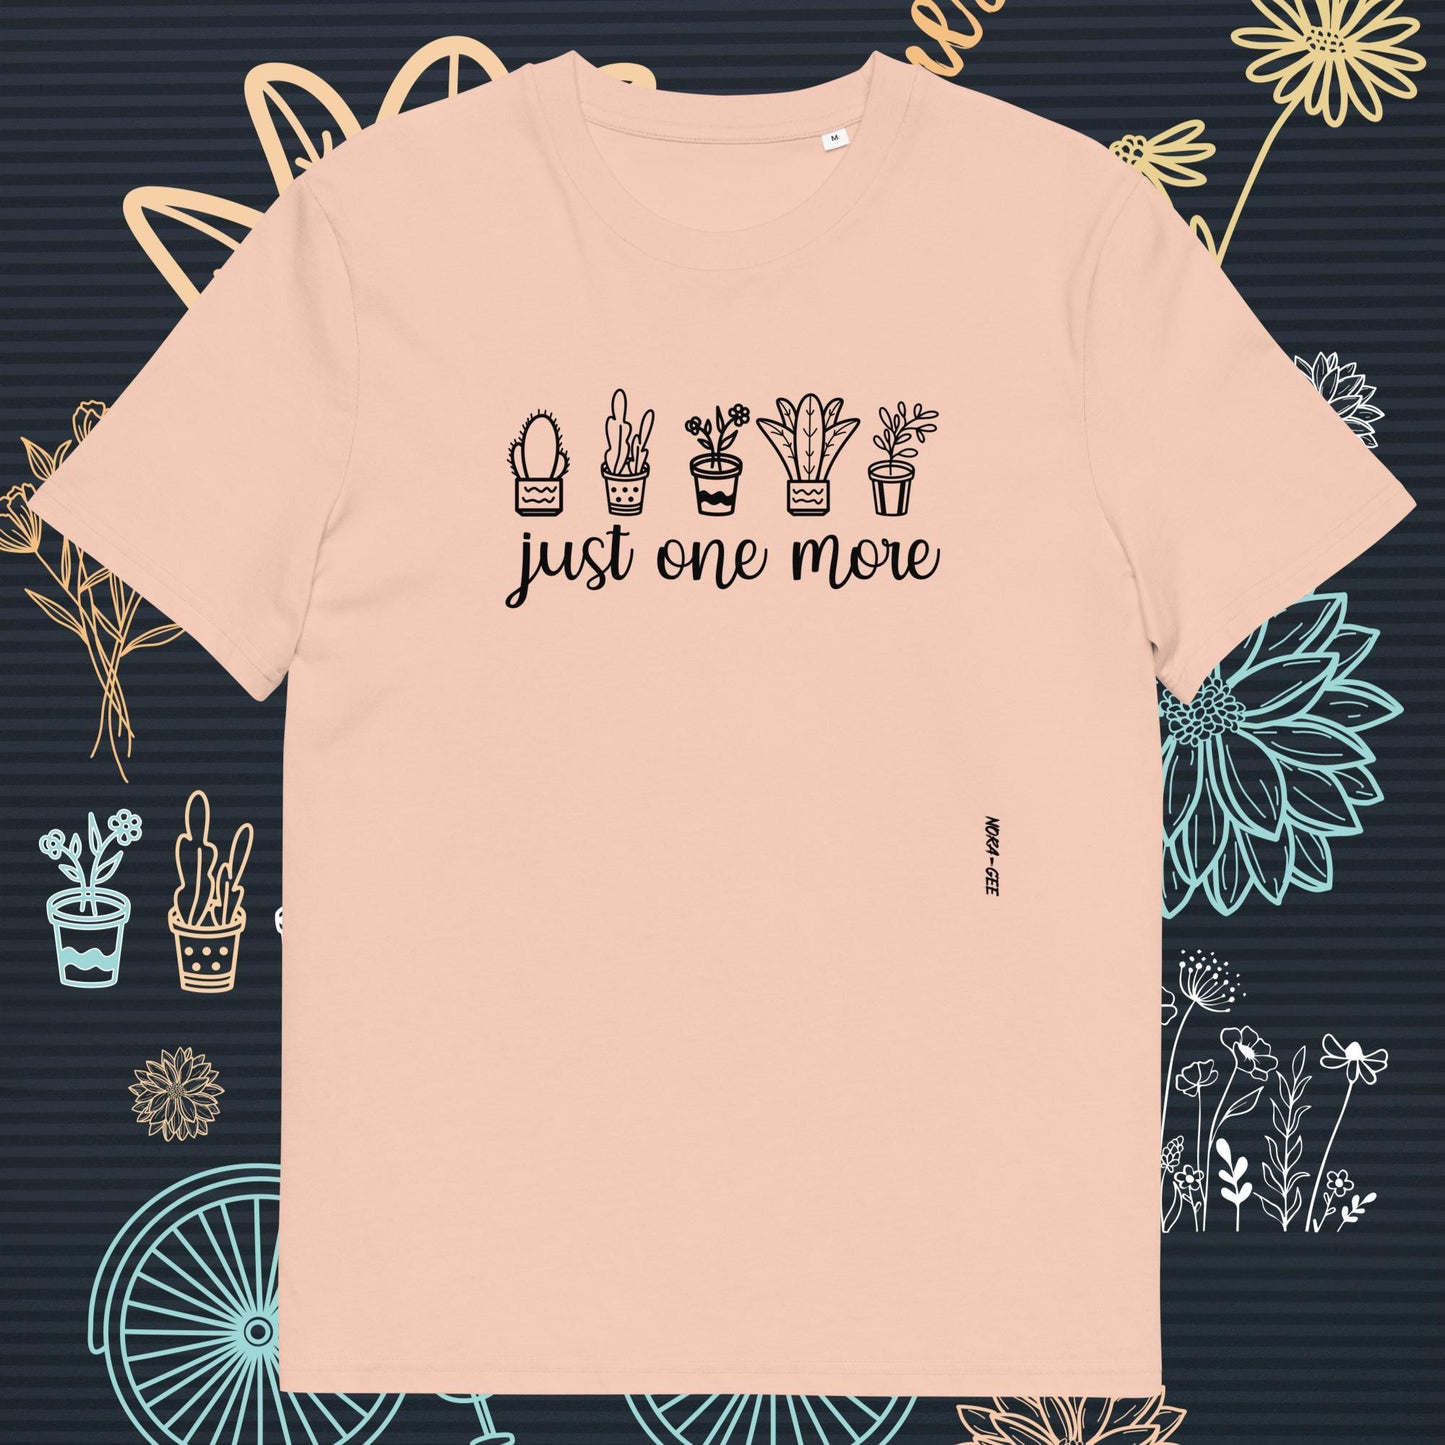 Unisex t-shirt: Just one more